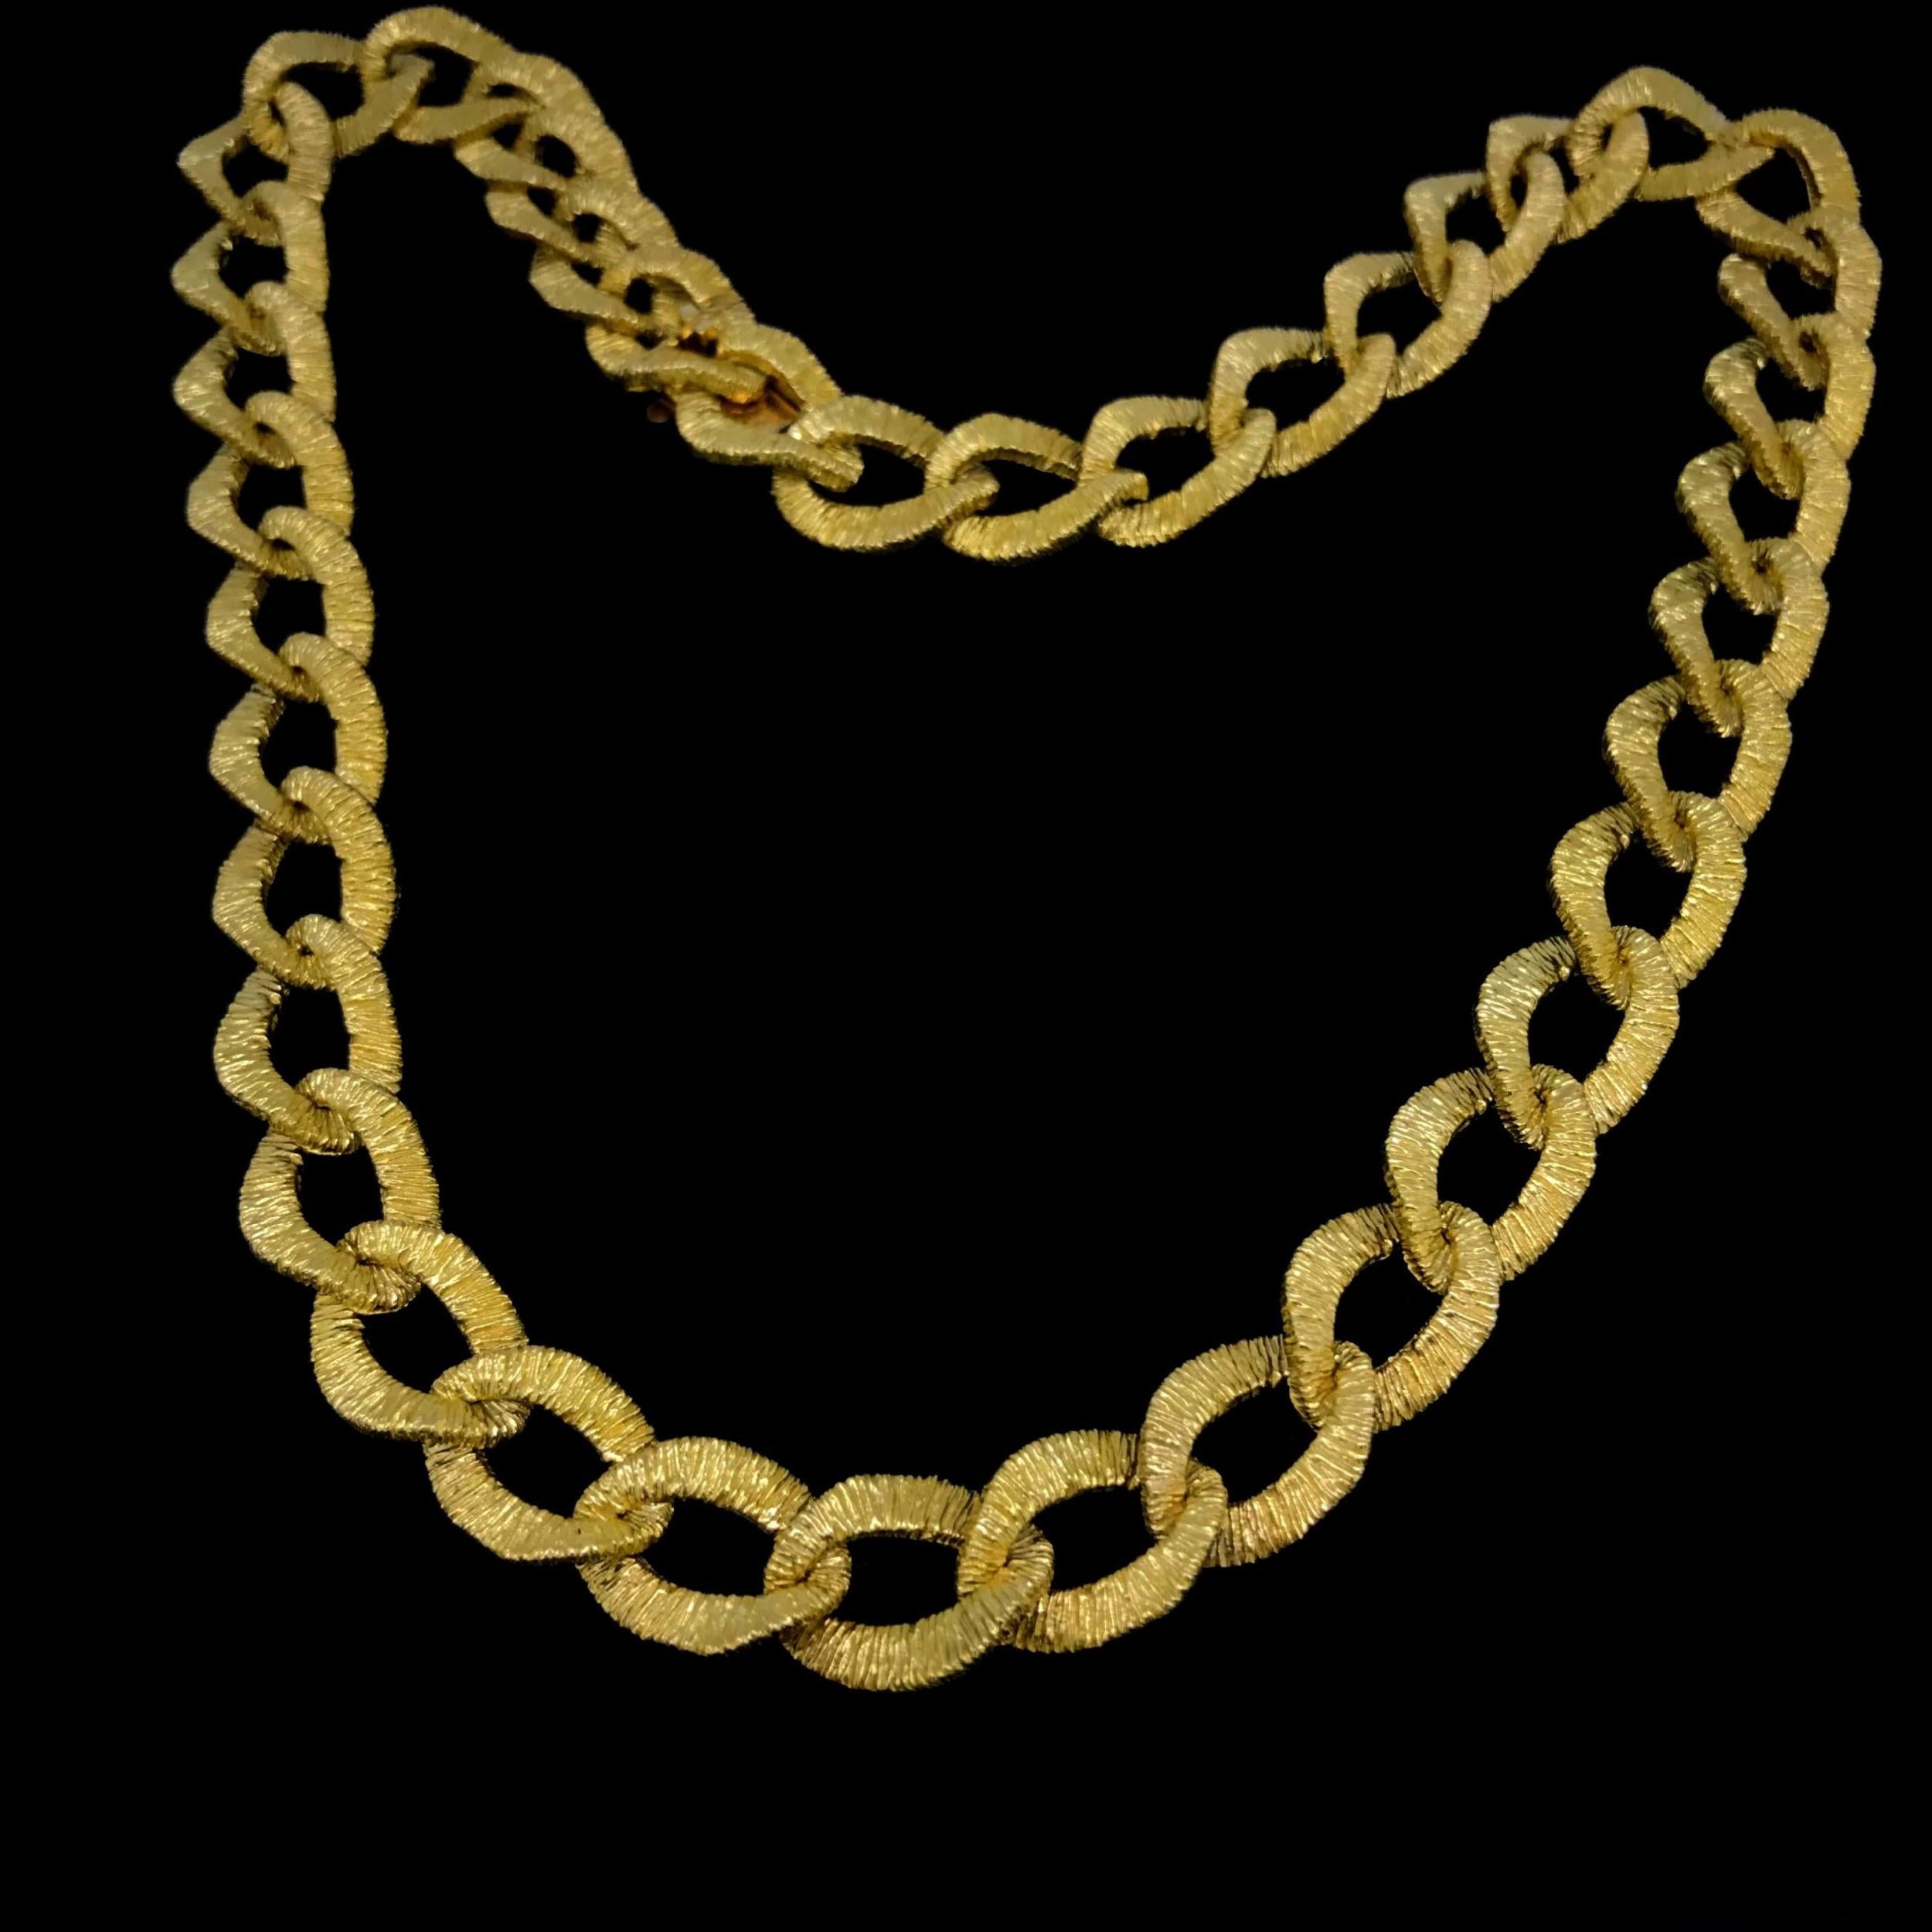 Weight:	65.62 gr

Metal:	18kt Yellow Gold

Condition:	Very Good

Hallmarks:	French, the owl
	
Comments: 	This ravishing collar necklace from the Seventies is fully made in 18k yellow gold. The necklace is very pleasant to wear and the links are